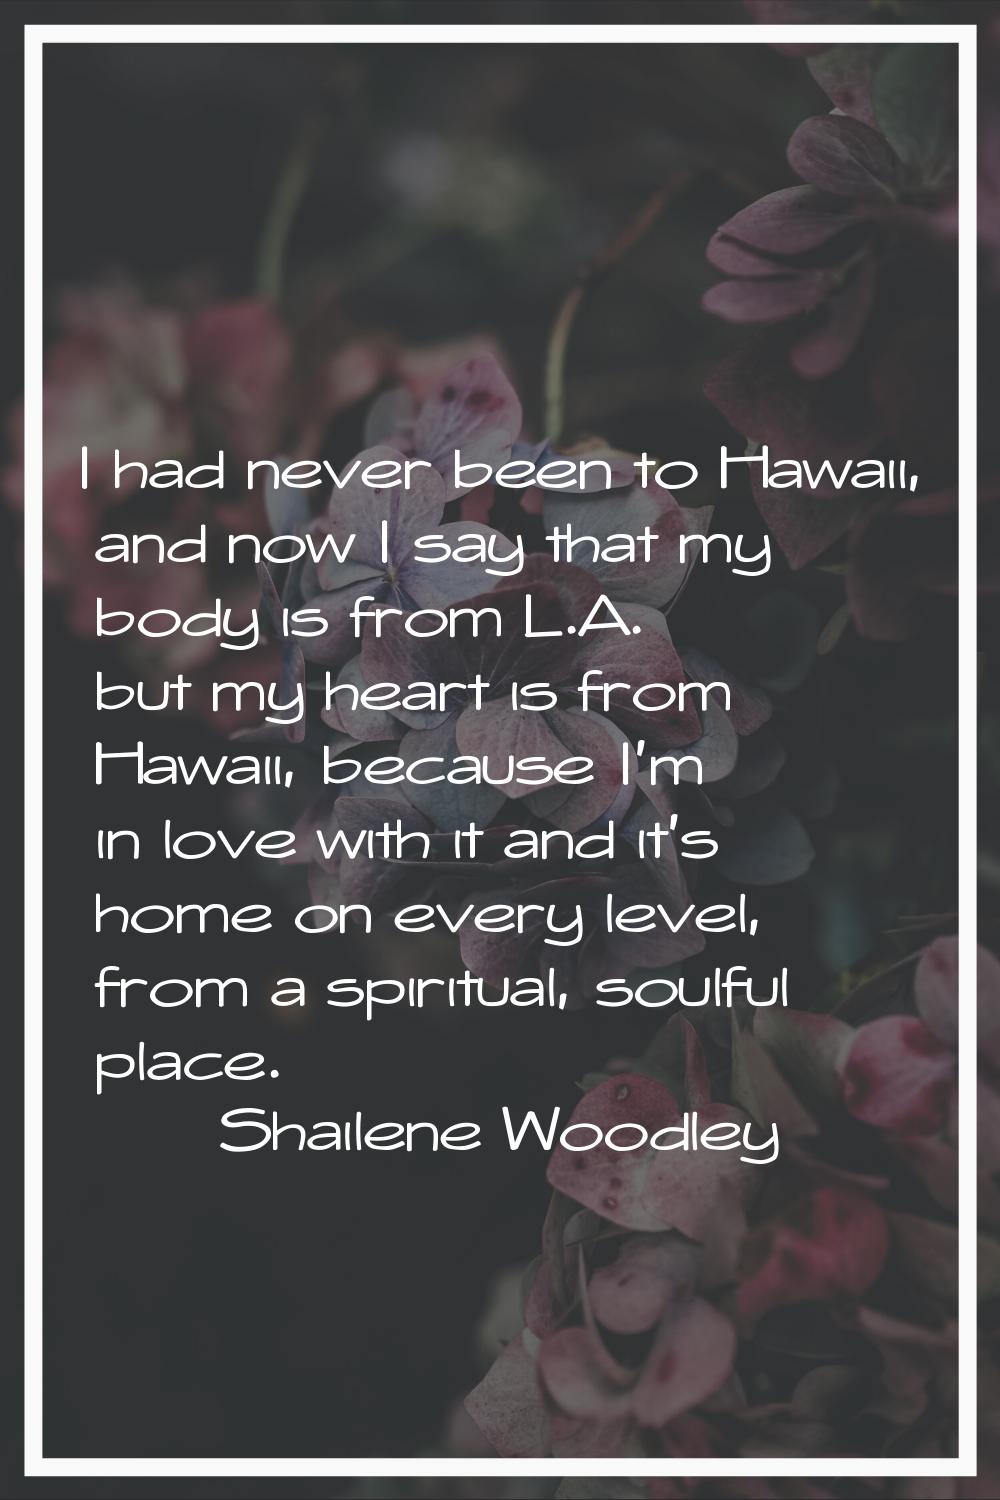 I had never been to Hawaii, and now I say that my body is from L.A. but my heart is from Hawaii, be